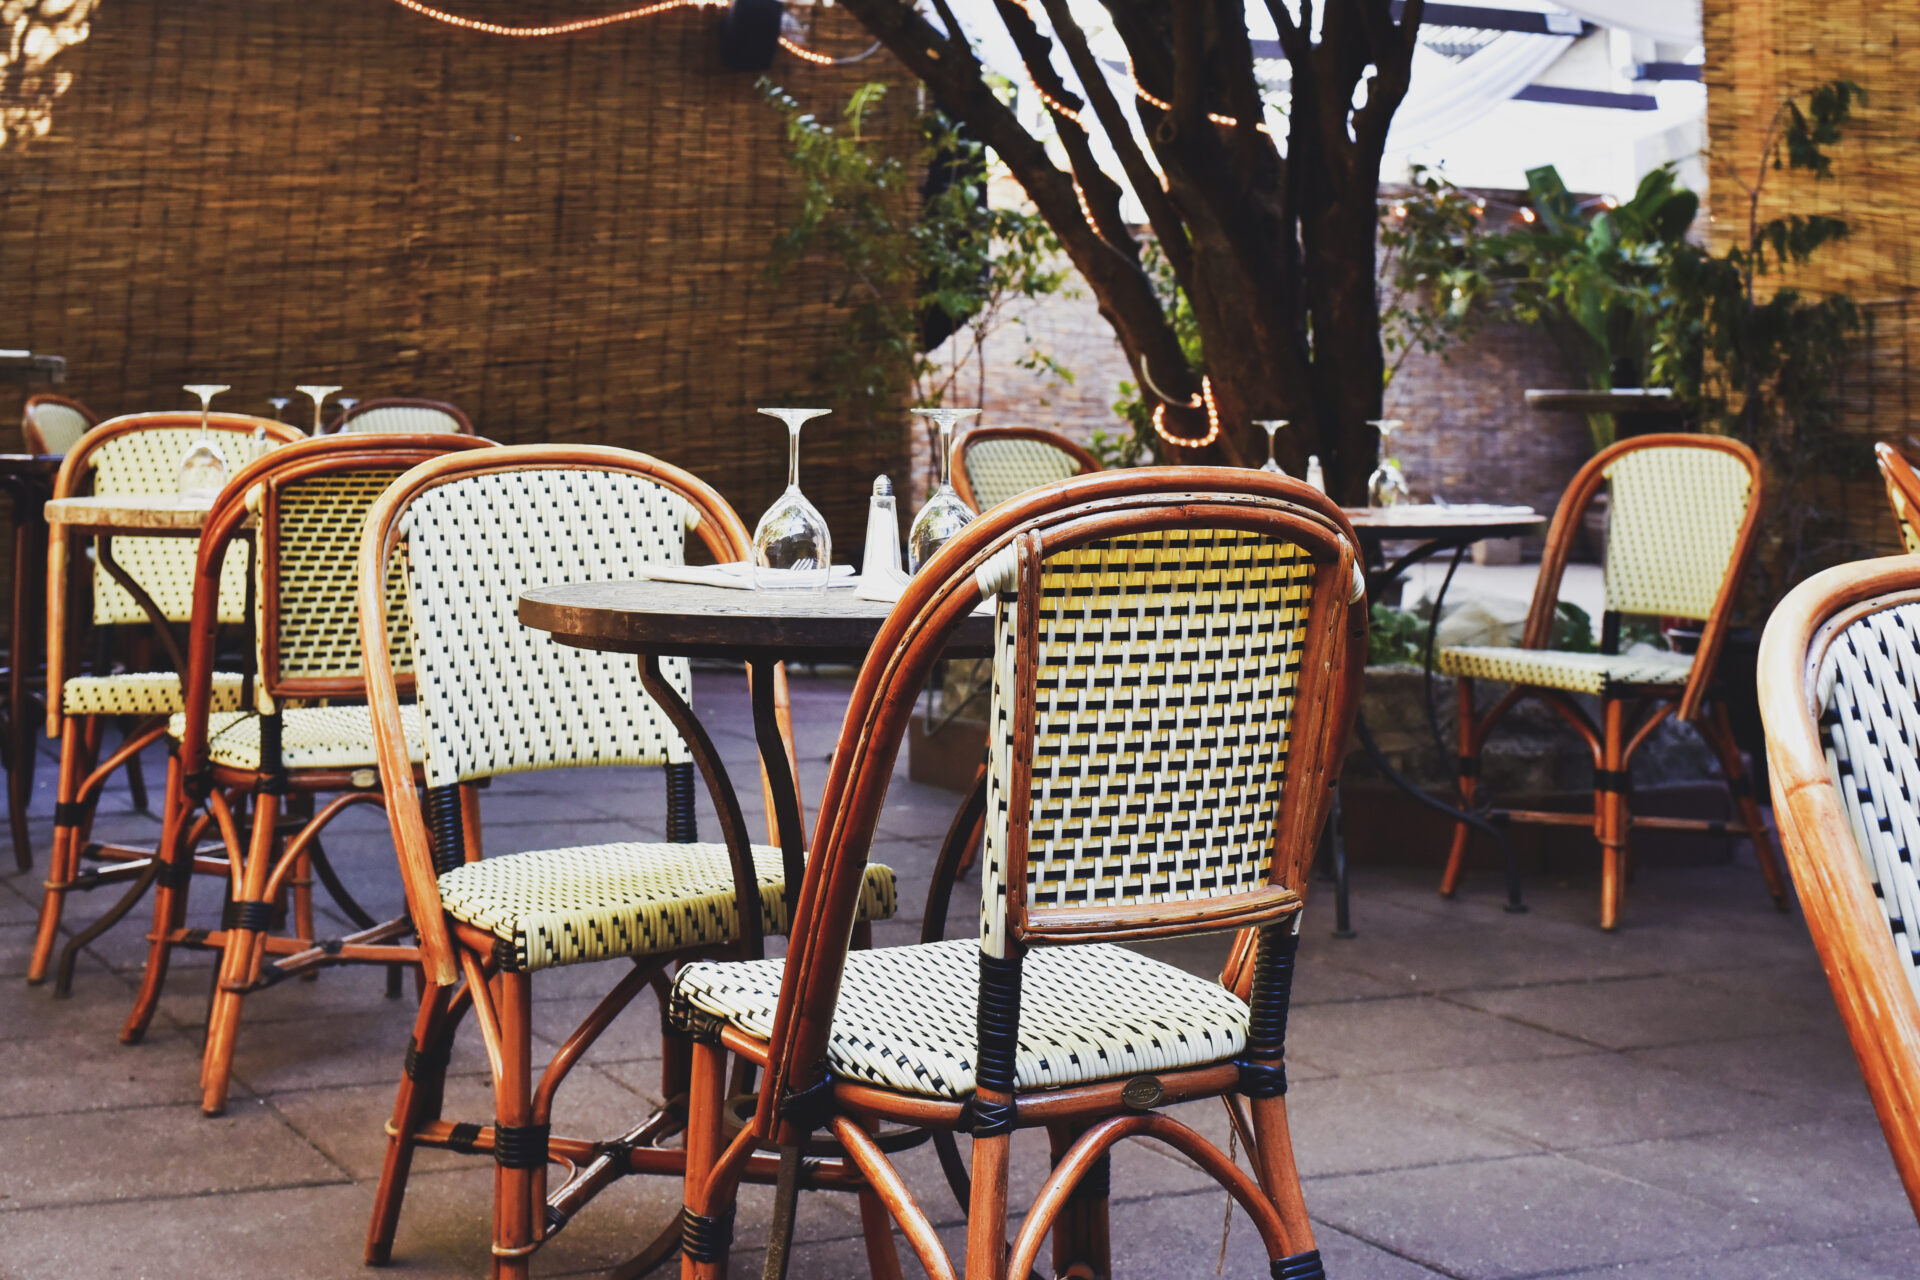 A table and chairs outside on the patio.